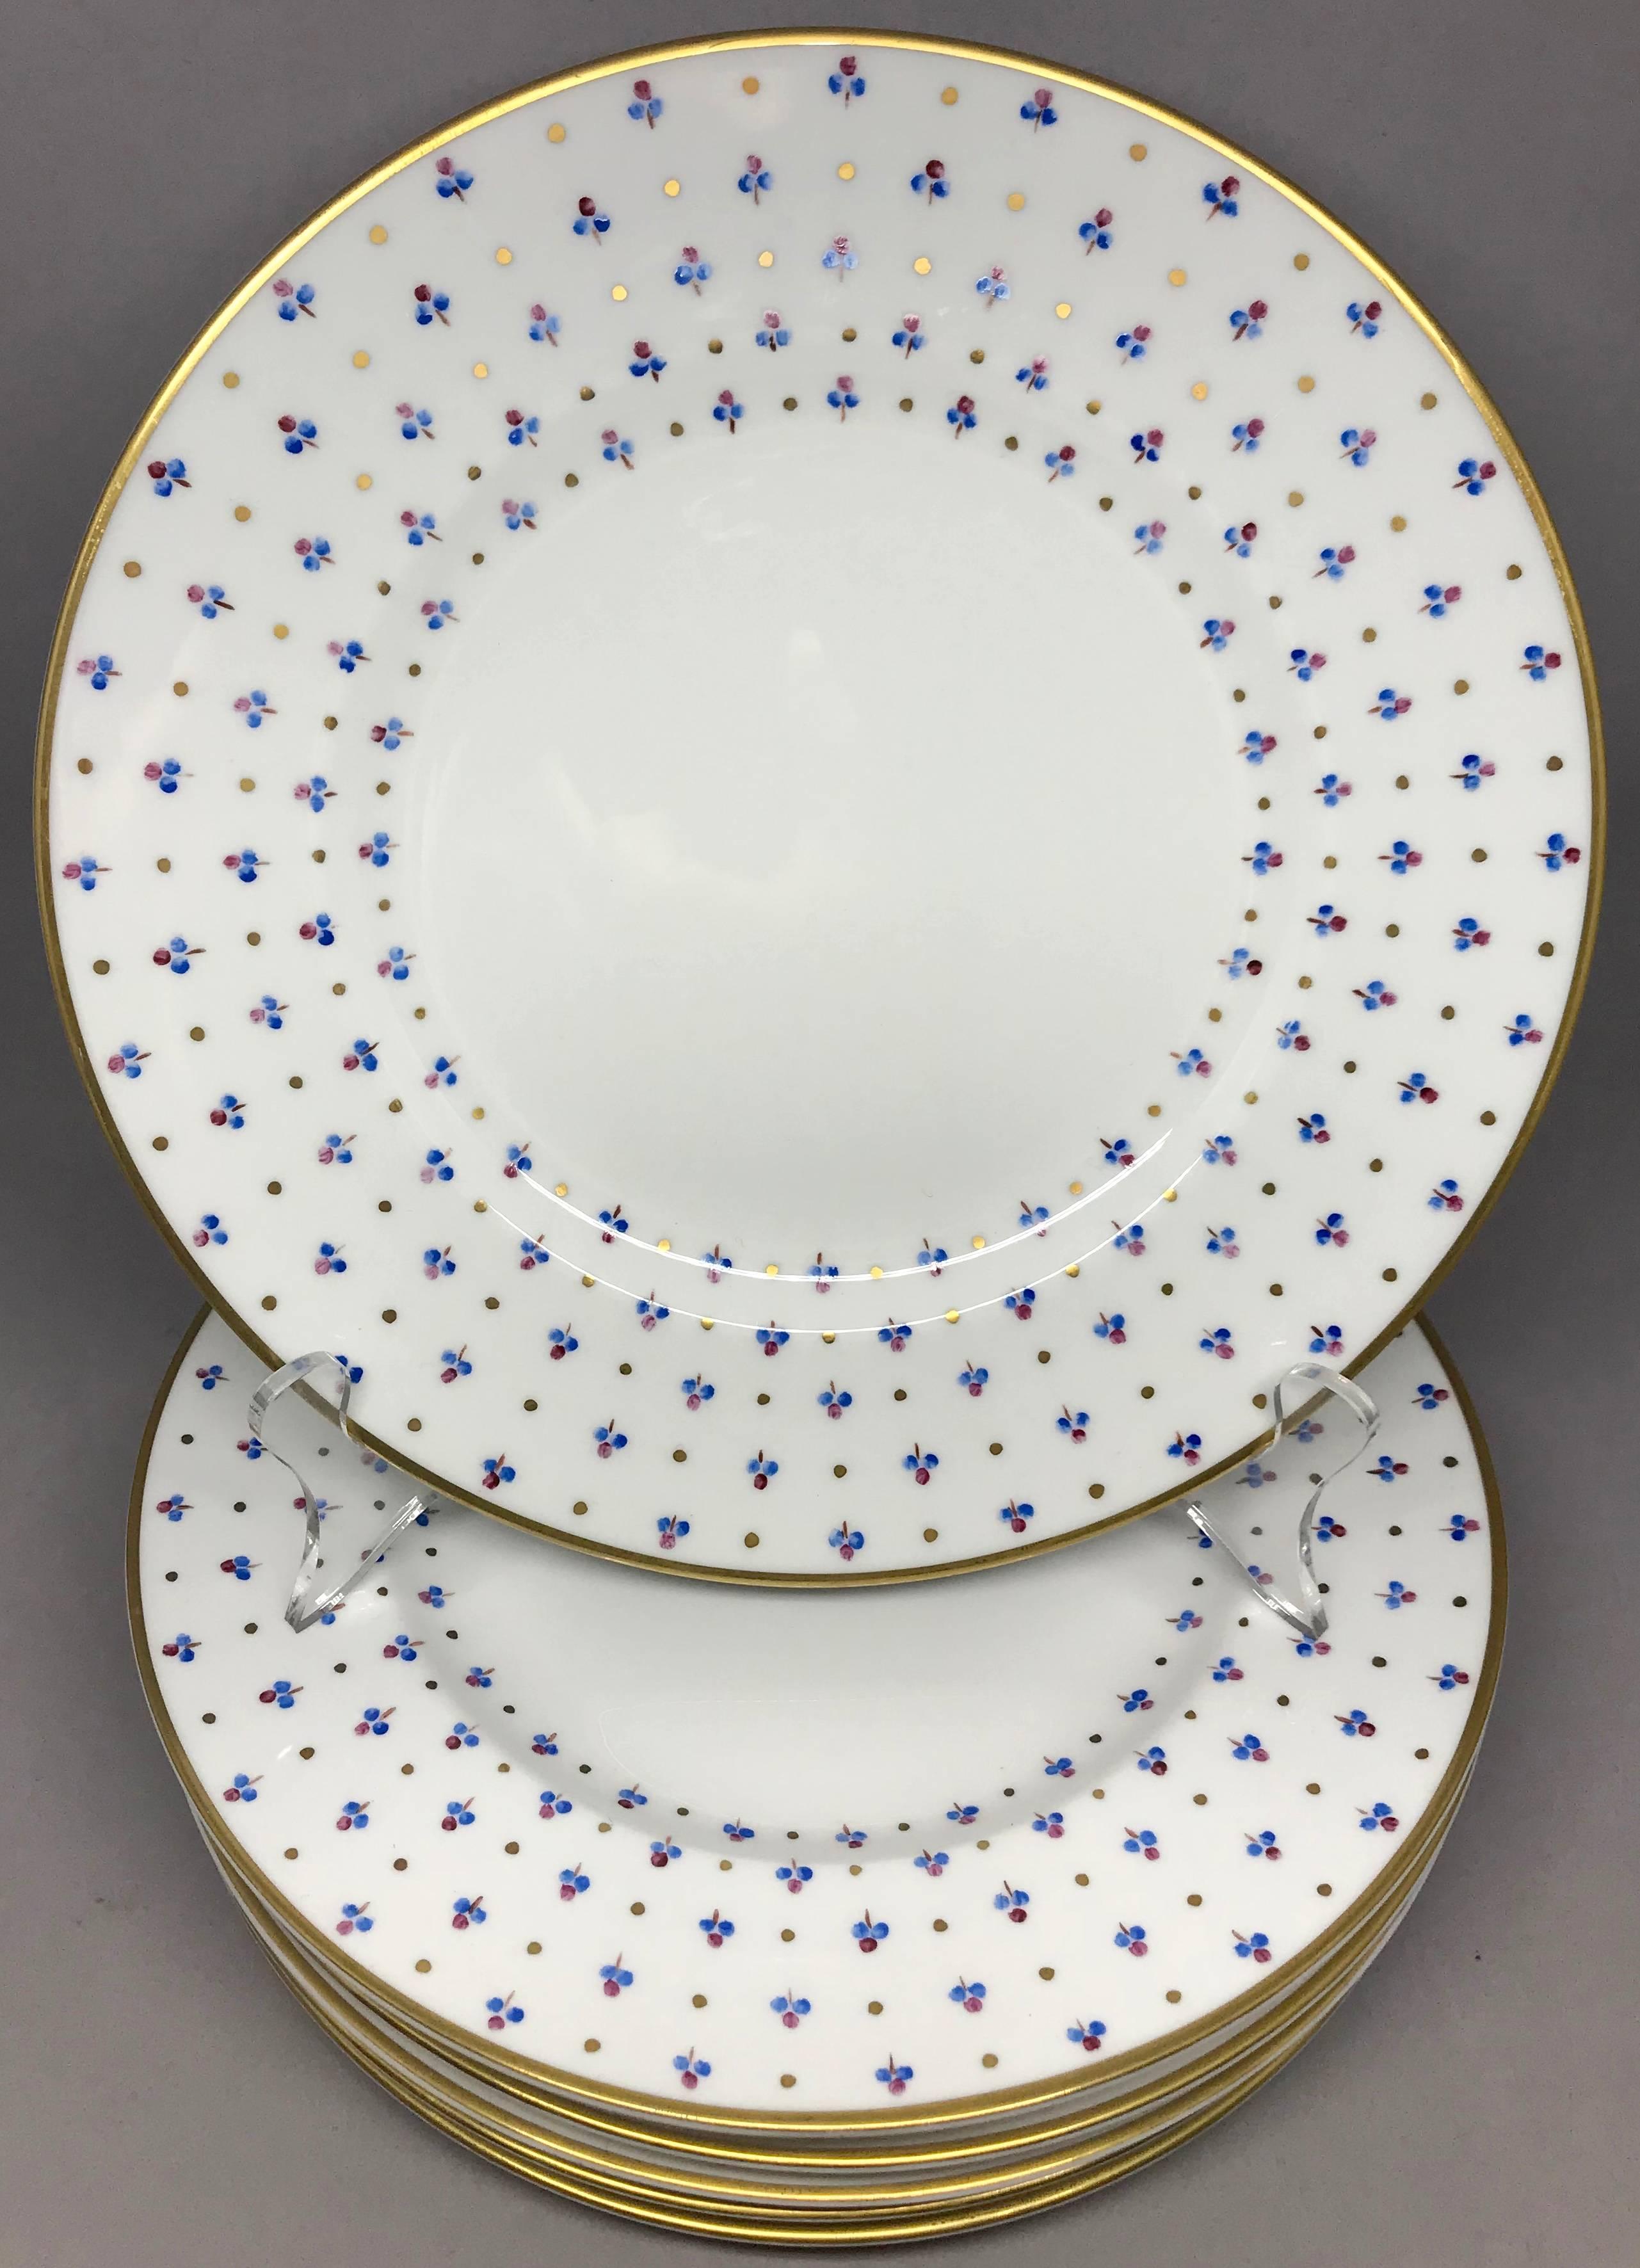 Set of six vintage Tiffany & Co. gold rimmed French plates. Six private stock gilt-rimmed dinner plates with blue and magenta floral sprigs, hand-painted in France. United States, mid-20th century.
Diameter 9.25